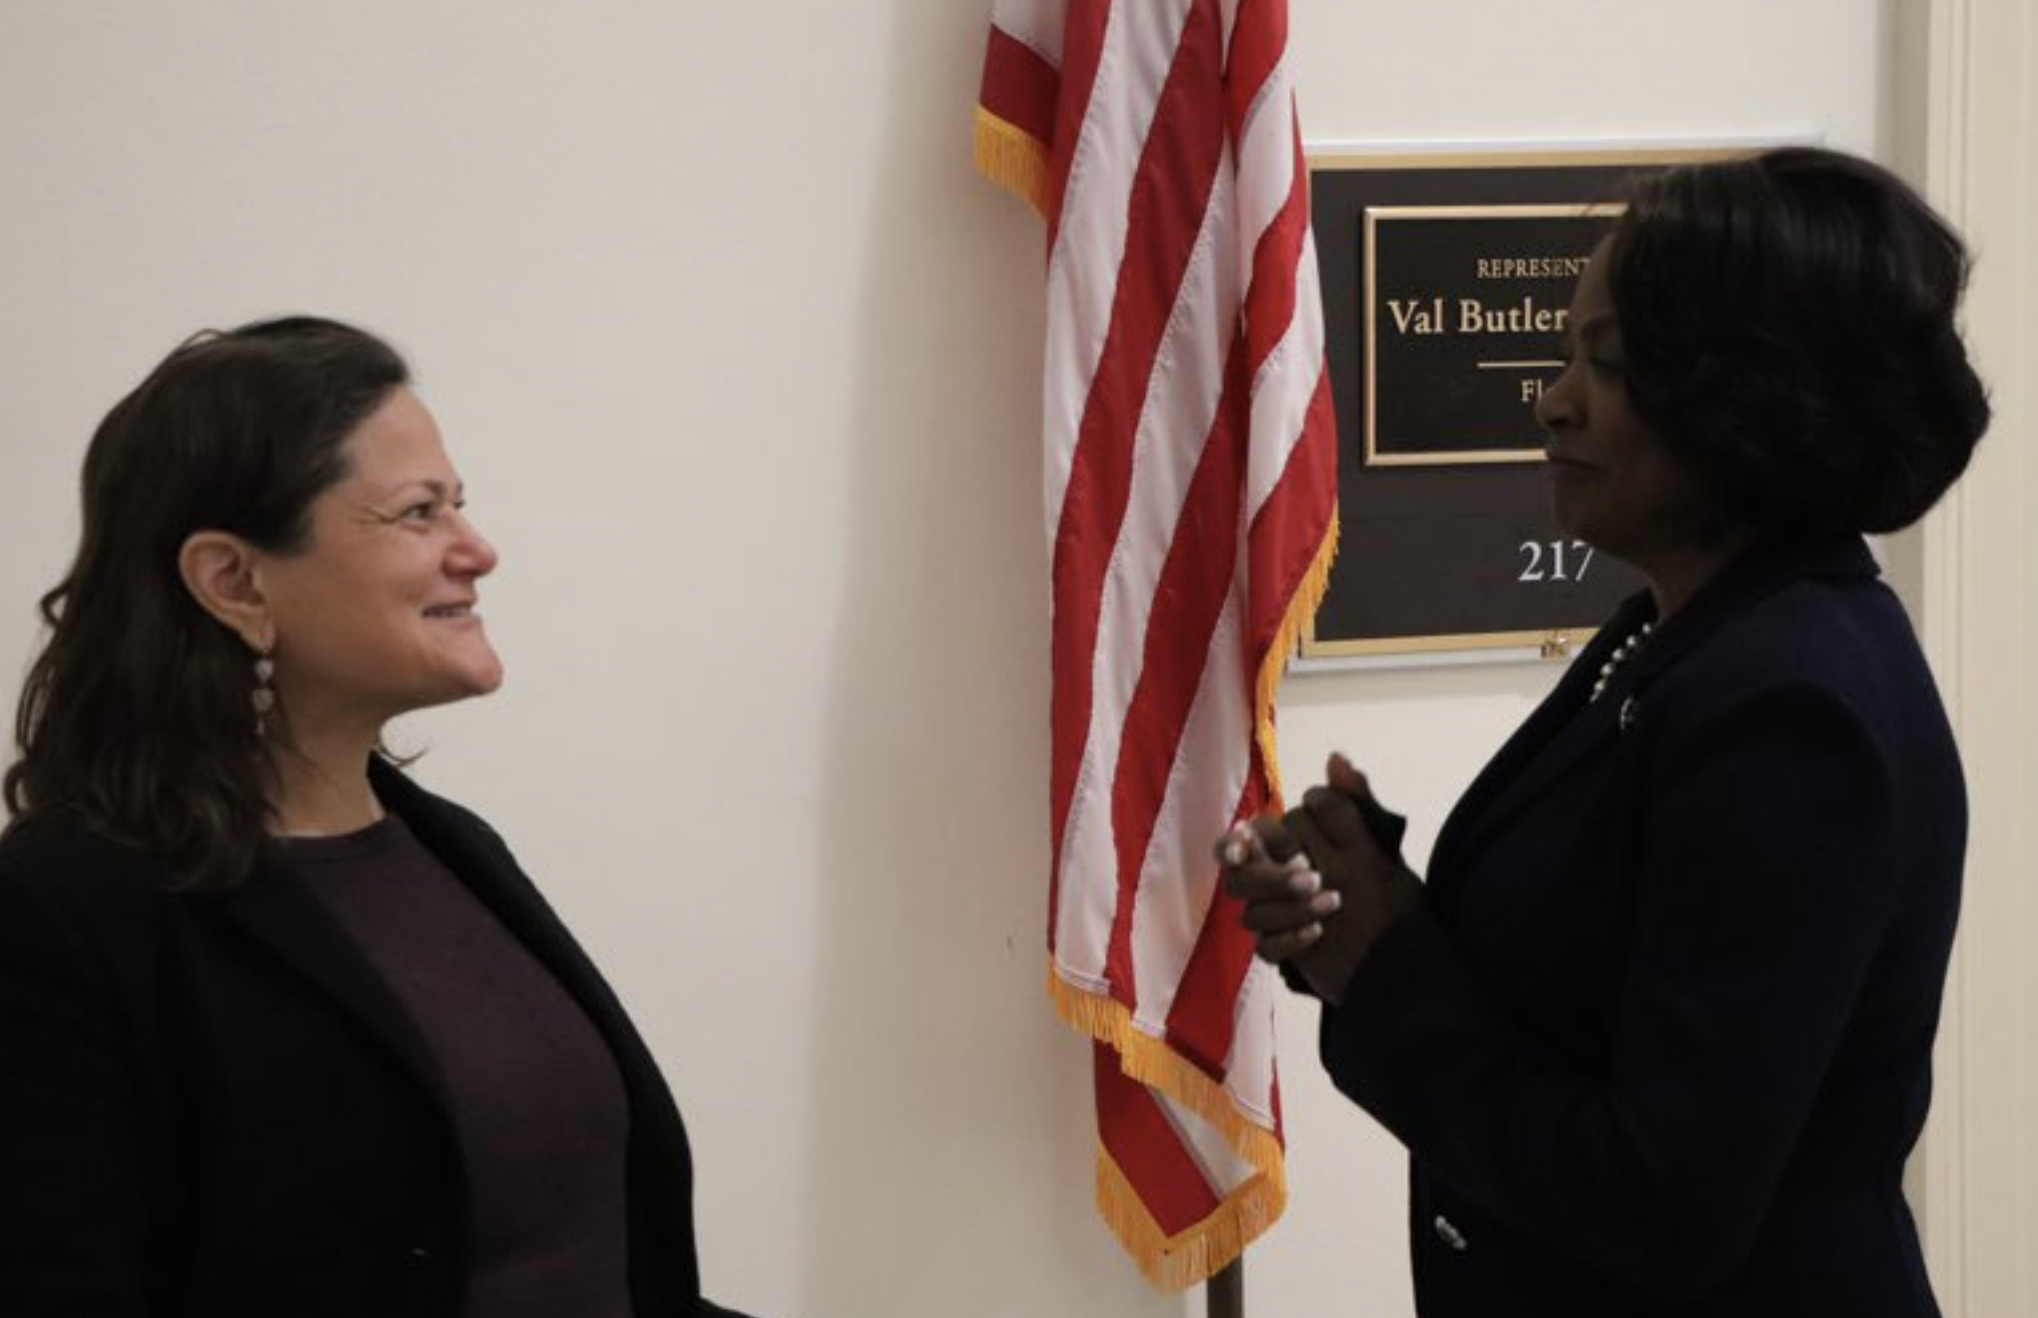 Demings Meets With Progressive Supporter of a Convicted Domestic Terrorist